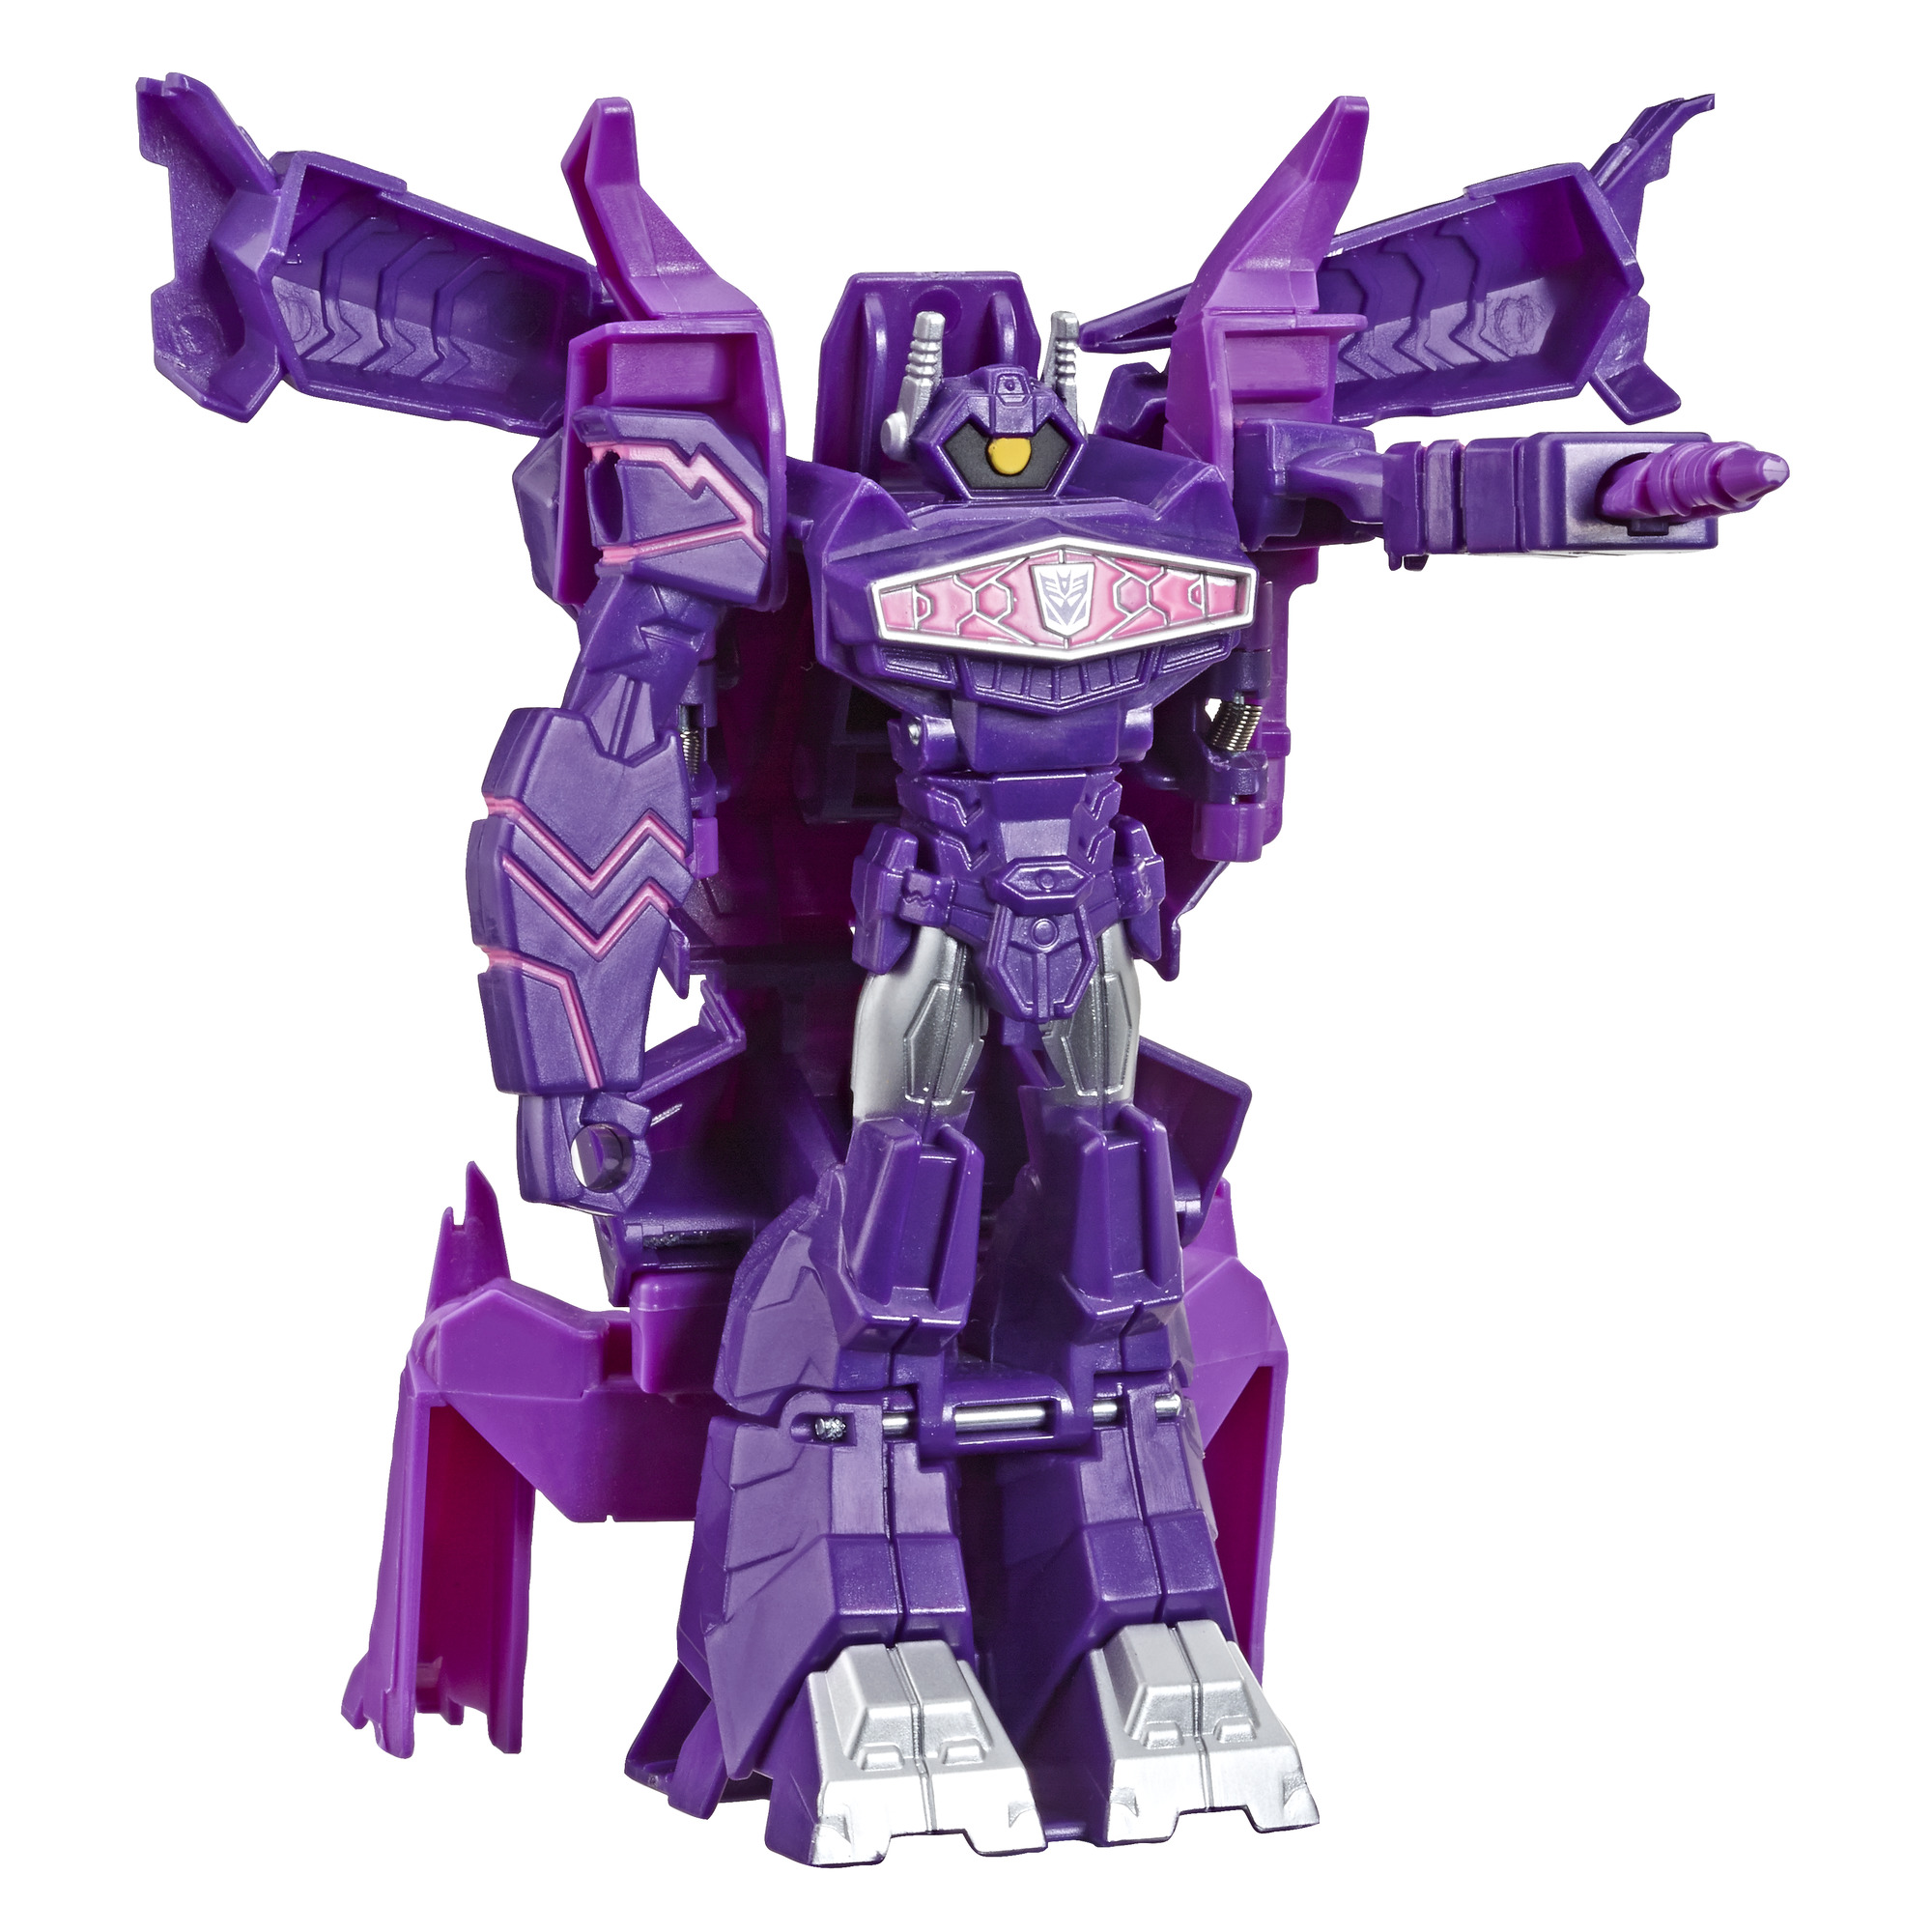 Transformers Cyberverse Action Attackers: 1-Step Changer Shockwave Action Figure - image 1 of 10